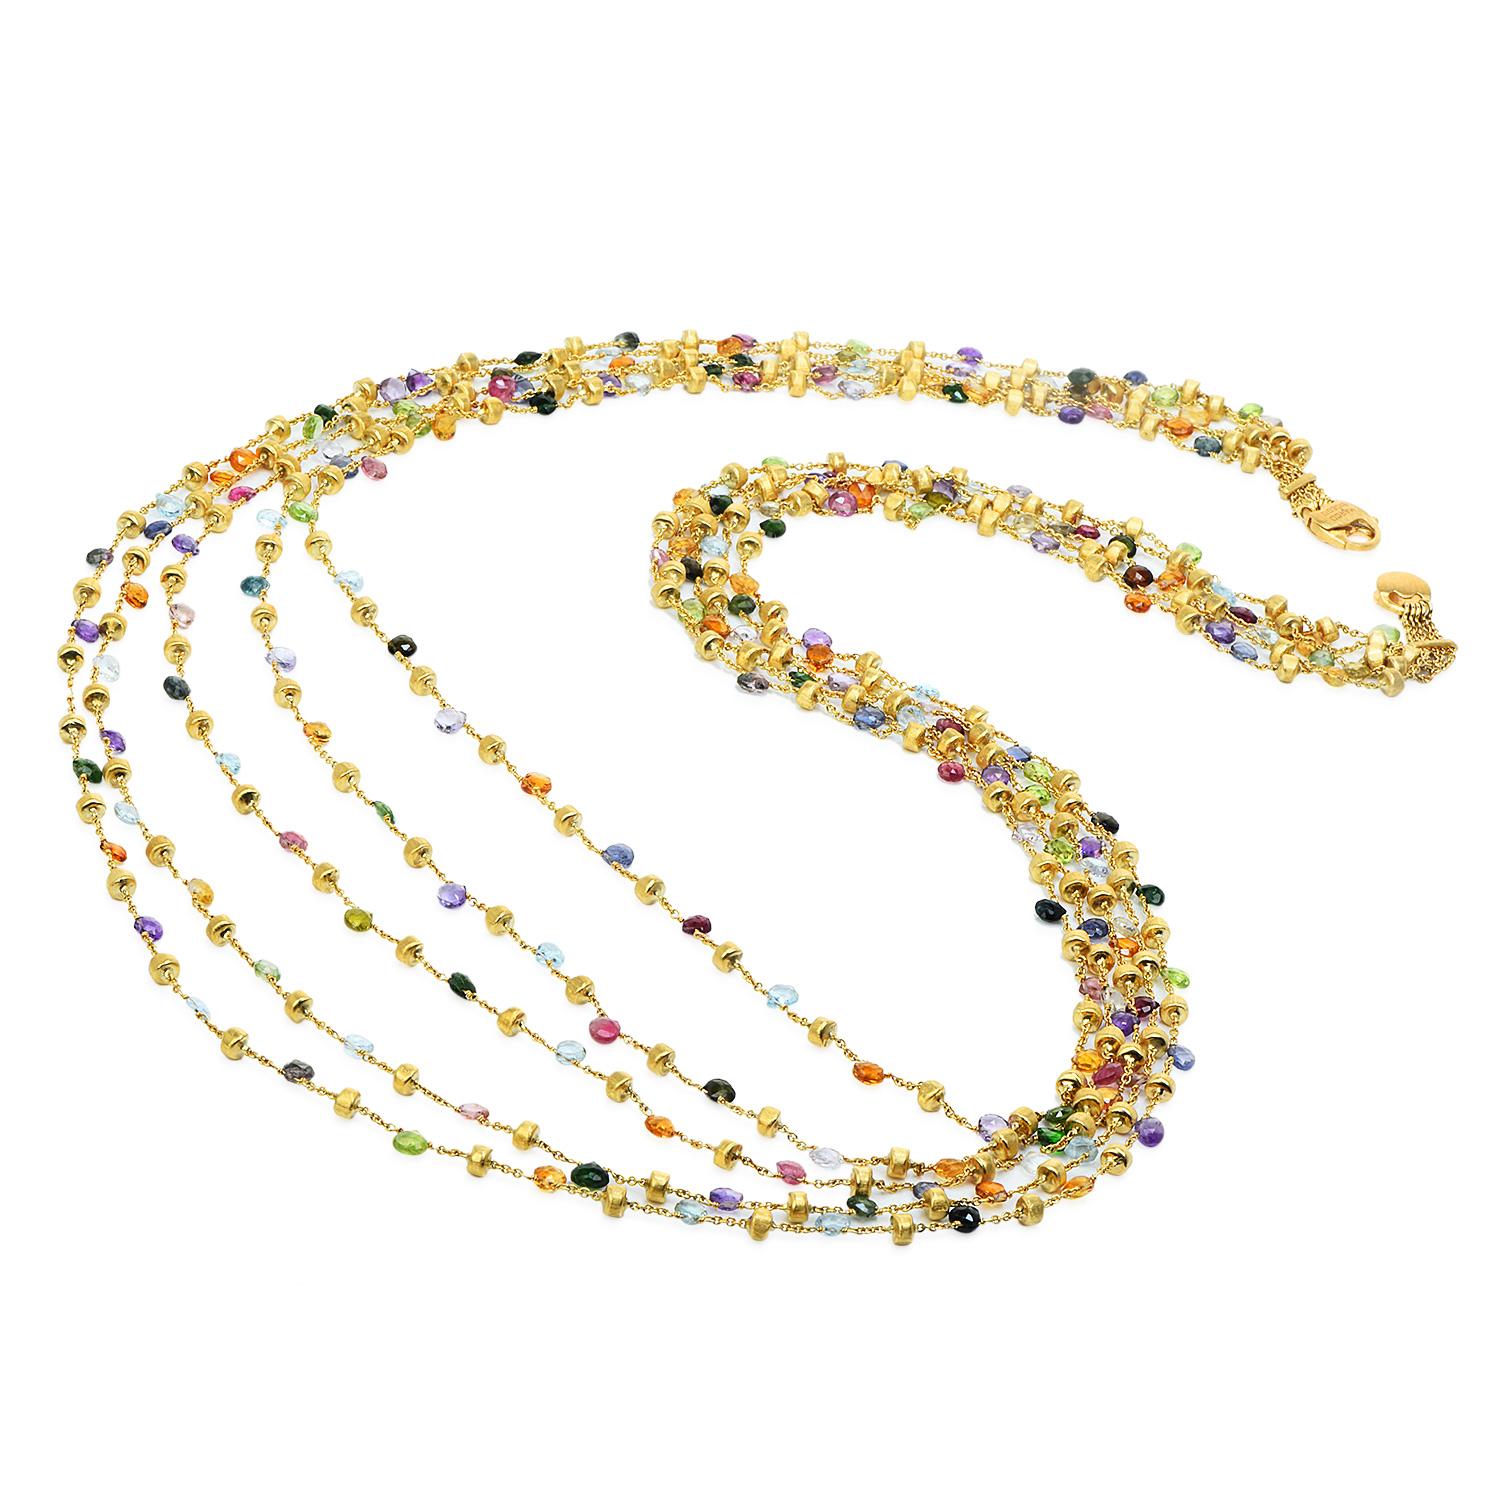 Marco Bicego found his inspiration in the chromatic and crystalline reflections of sunlight on the Mediterranean Coast. 

This exquisite necklace is crafted from his Paradise collection in solid 18K yellow gold, with textured beaded accents.